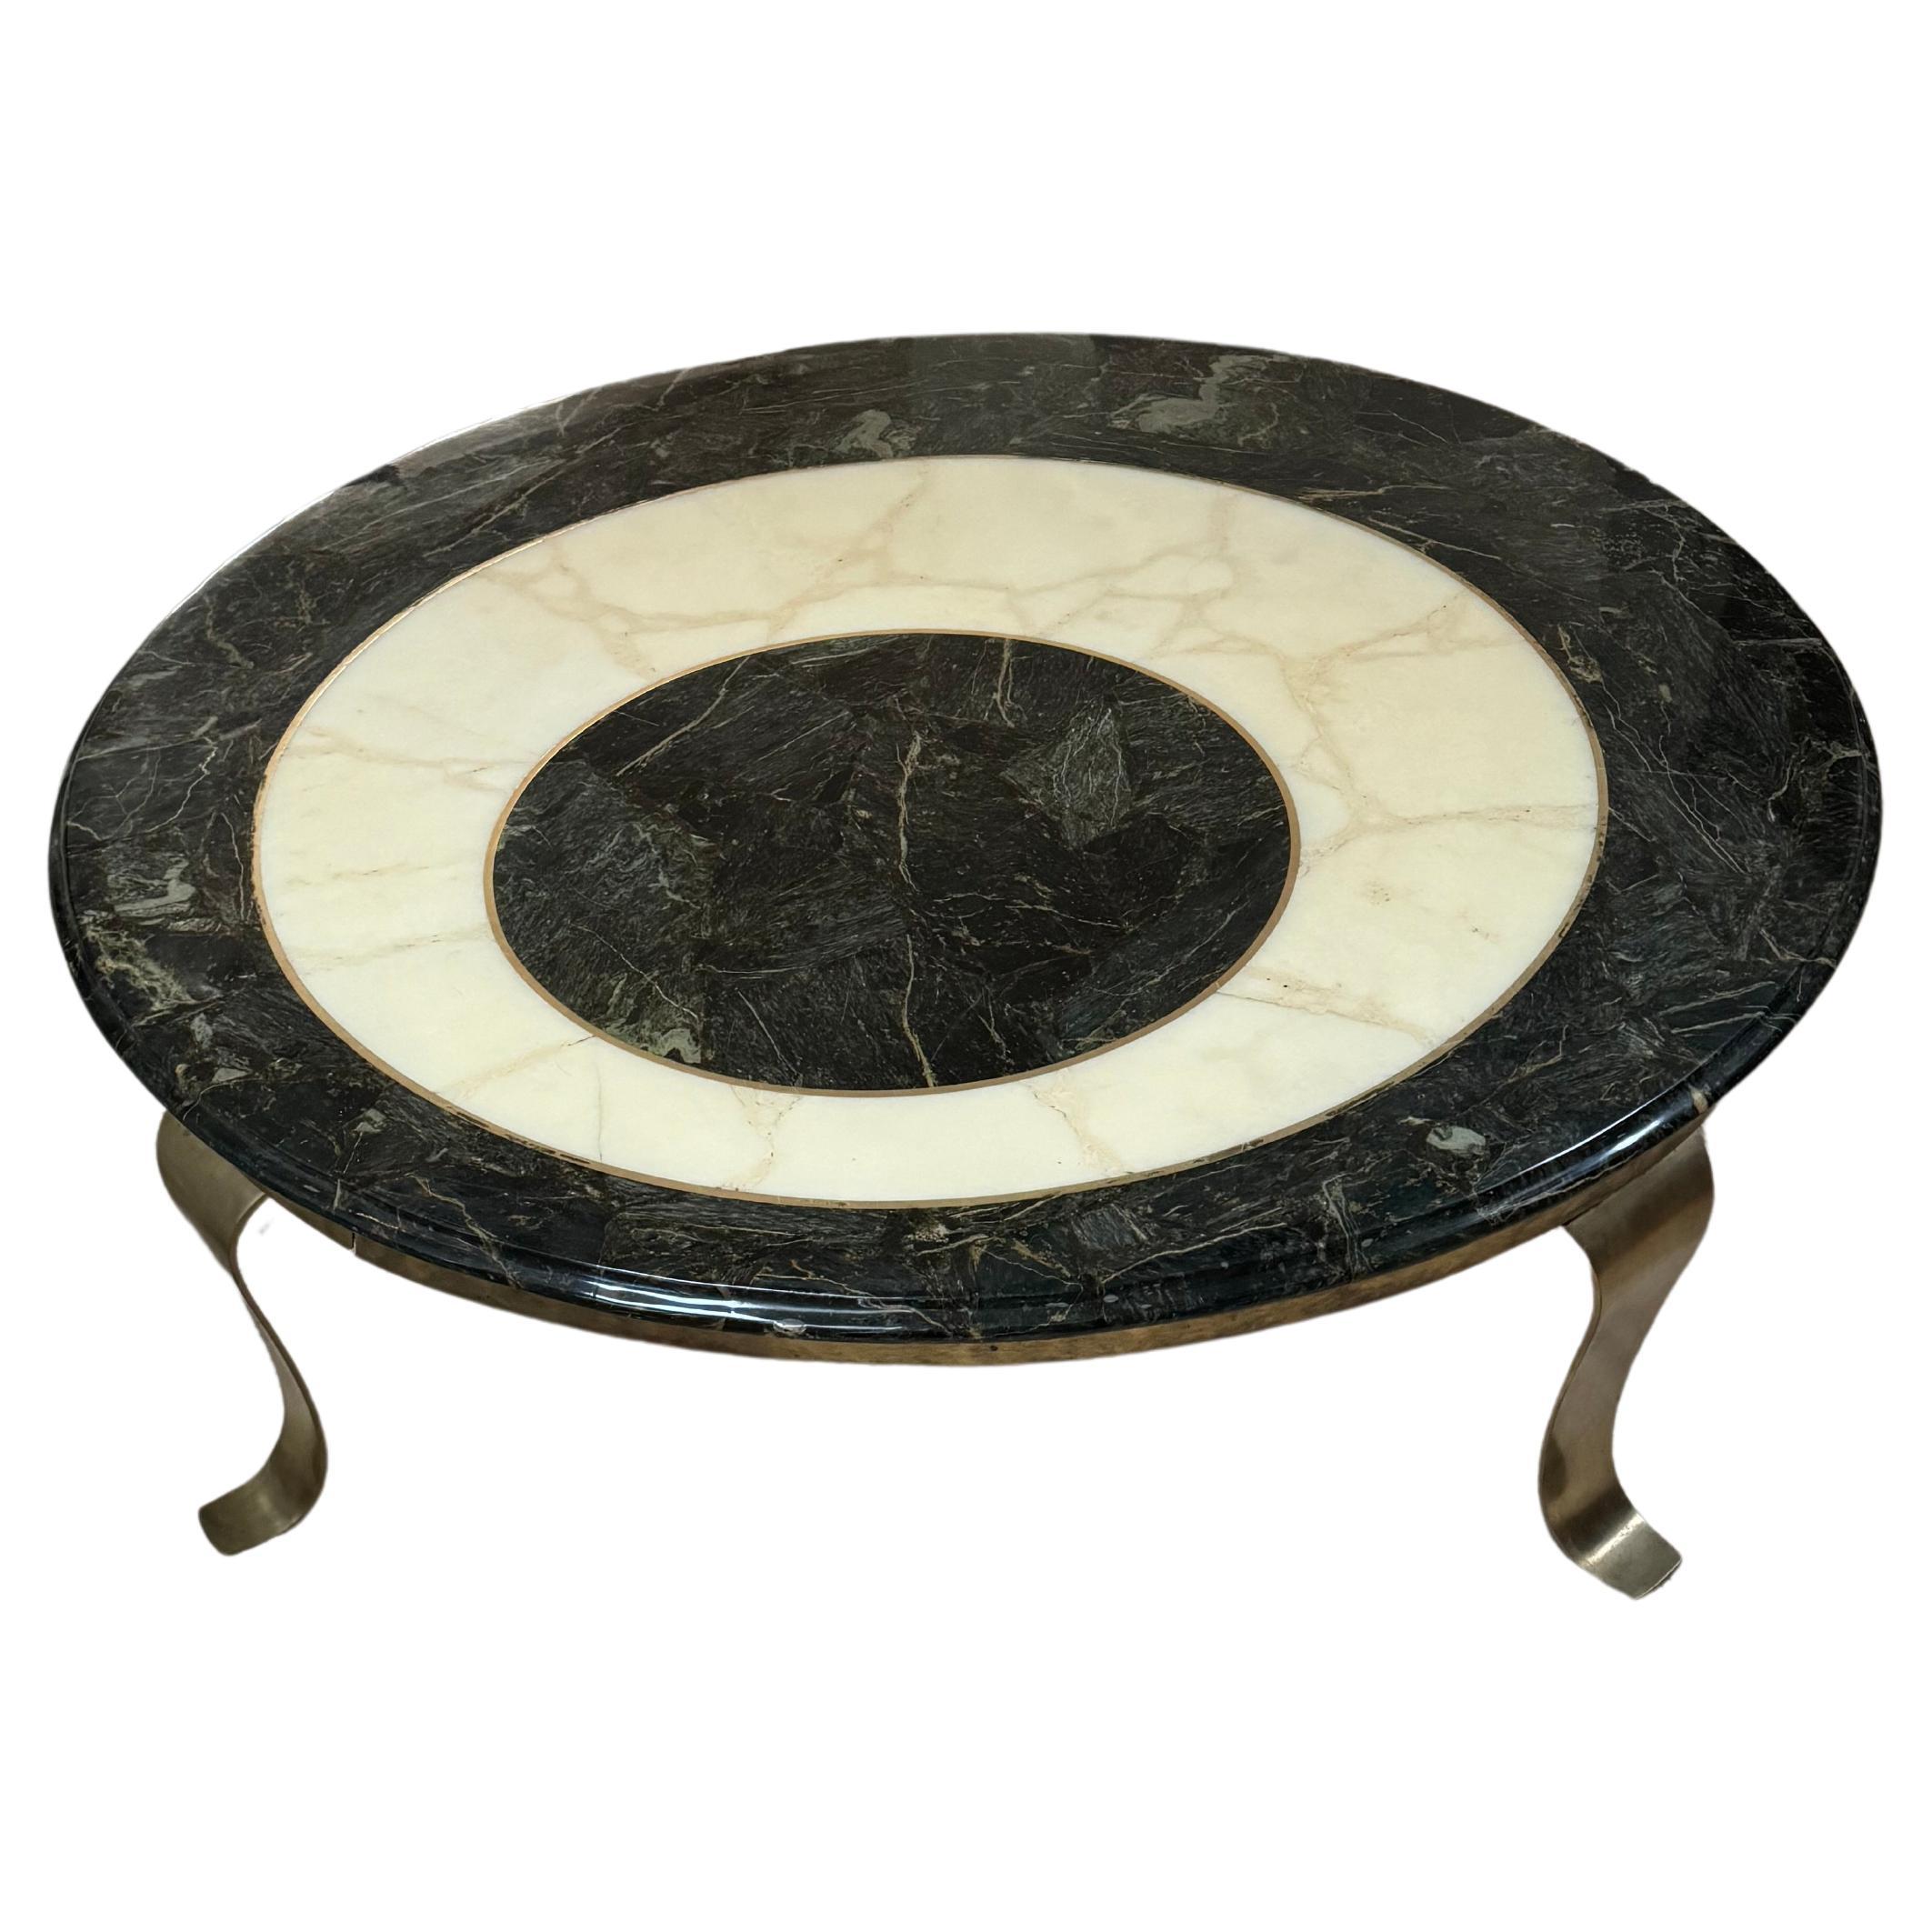 1960s Green and Cream Onyx Coffee Table by Arturo Pani for Muller of Mexico